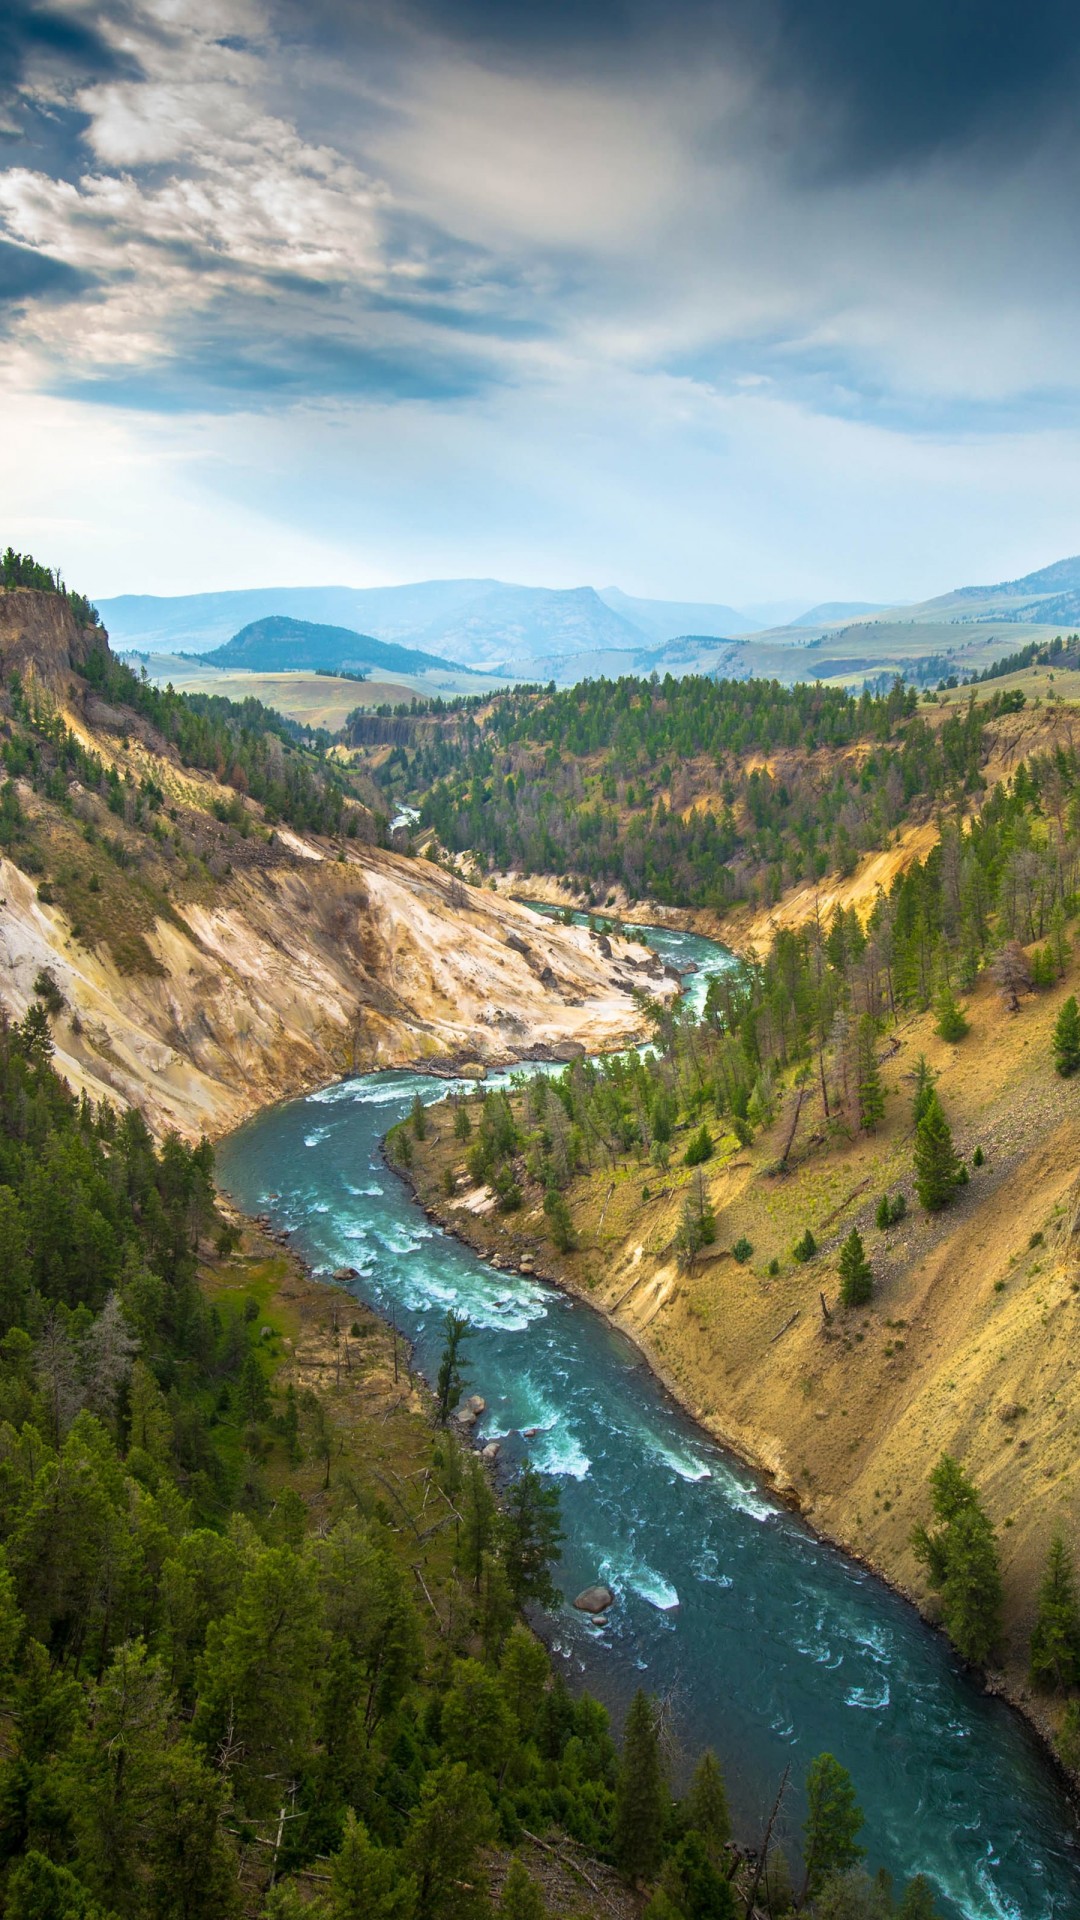 The River, Grand Canyon of Yellowstone National Park, USA Wallpaper for Google Nexus 5